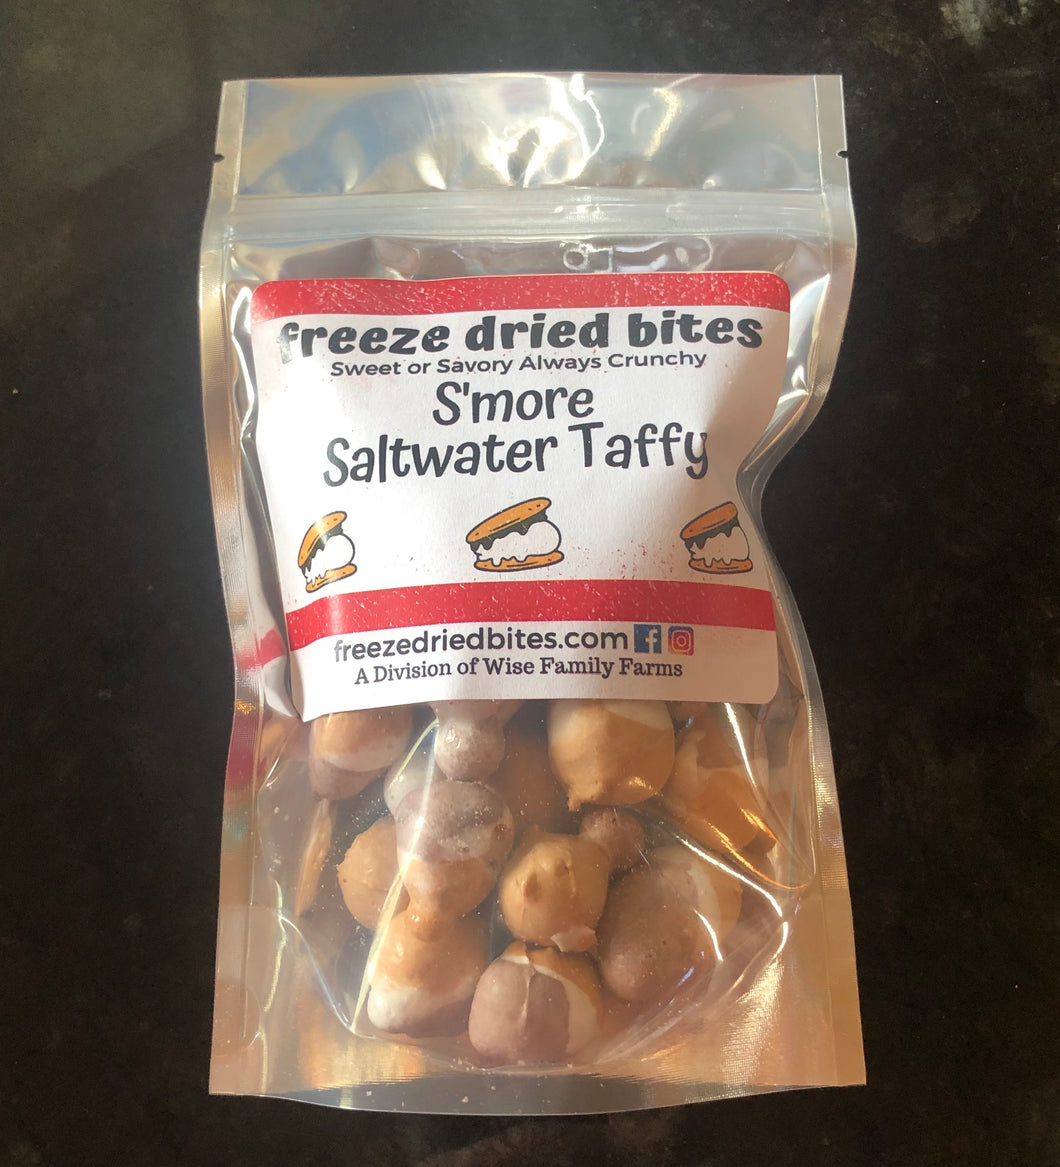 S’more Saltwater Taffy